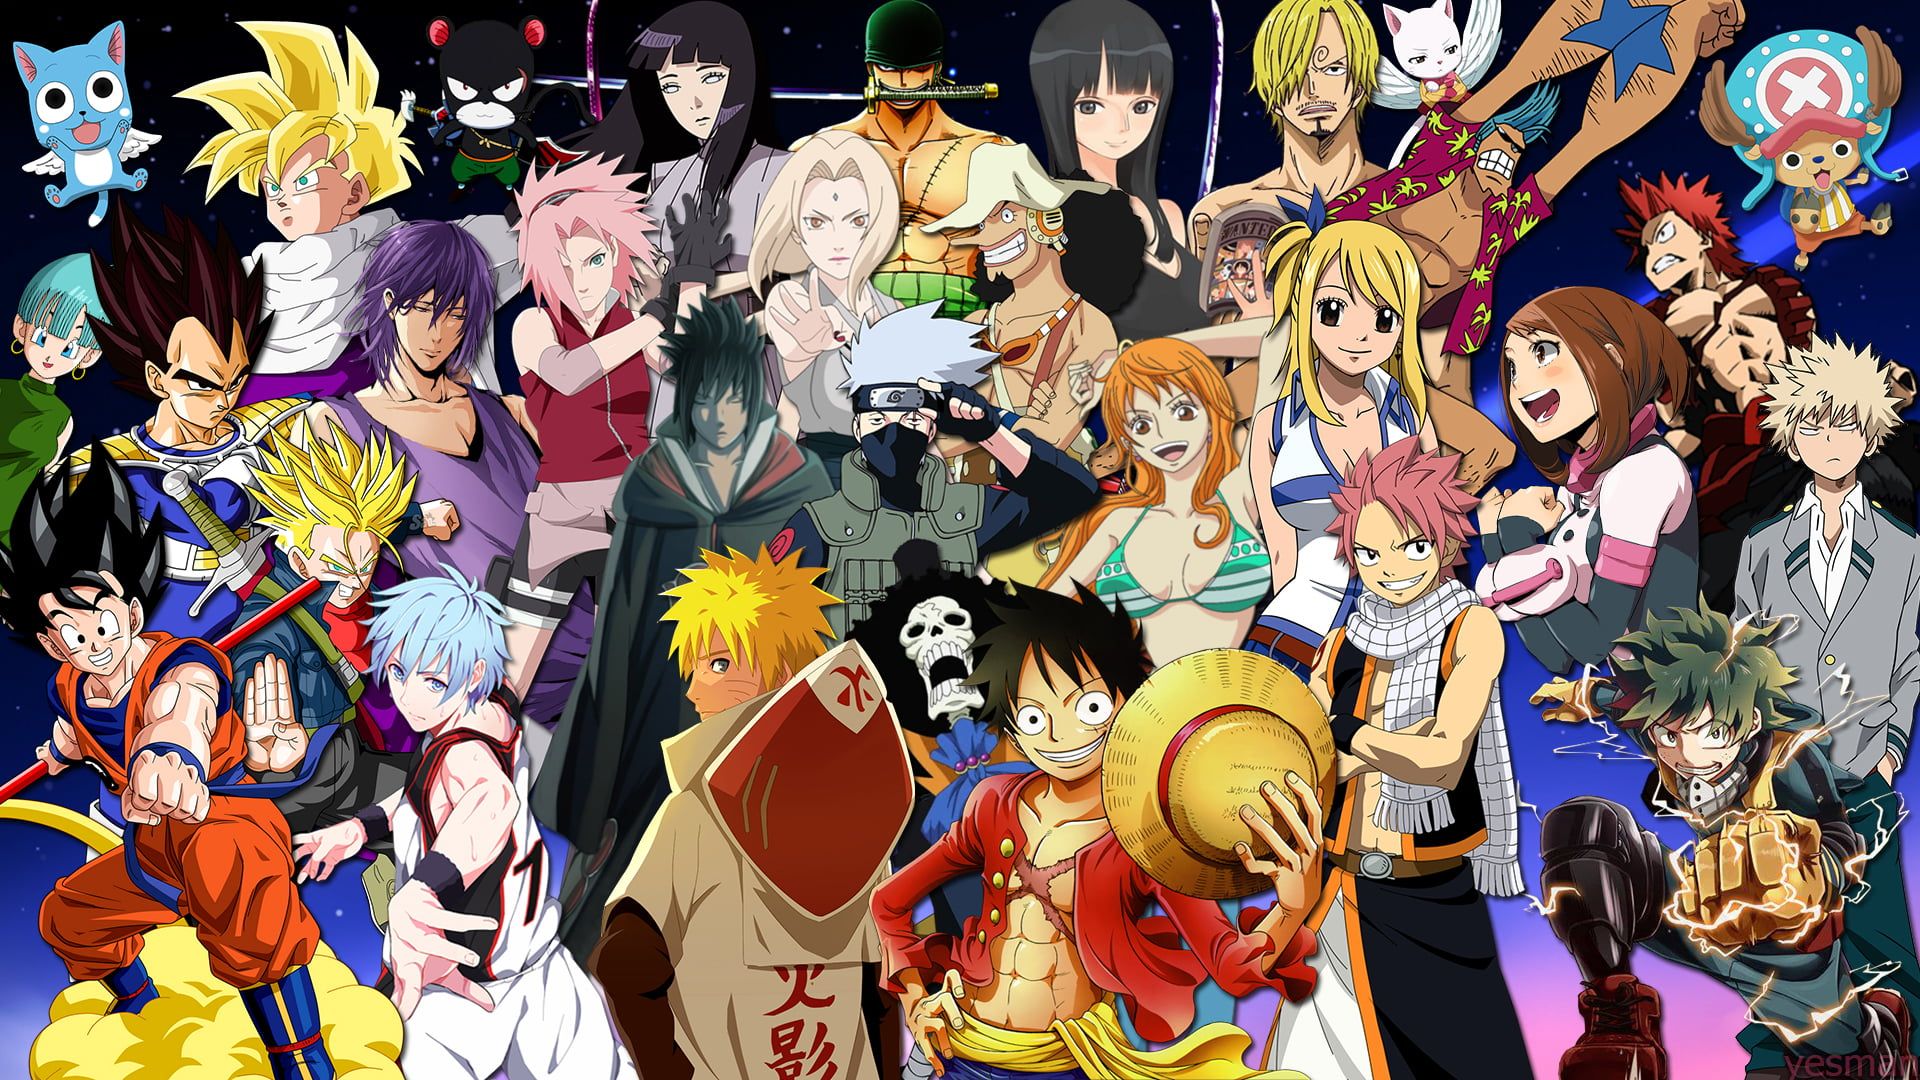 Assorted anime characters wallpaper, One Piece, Dragon Ball